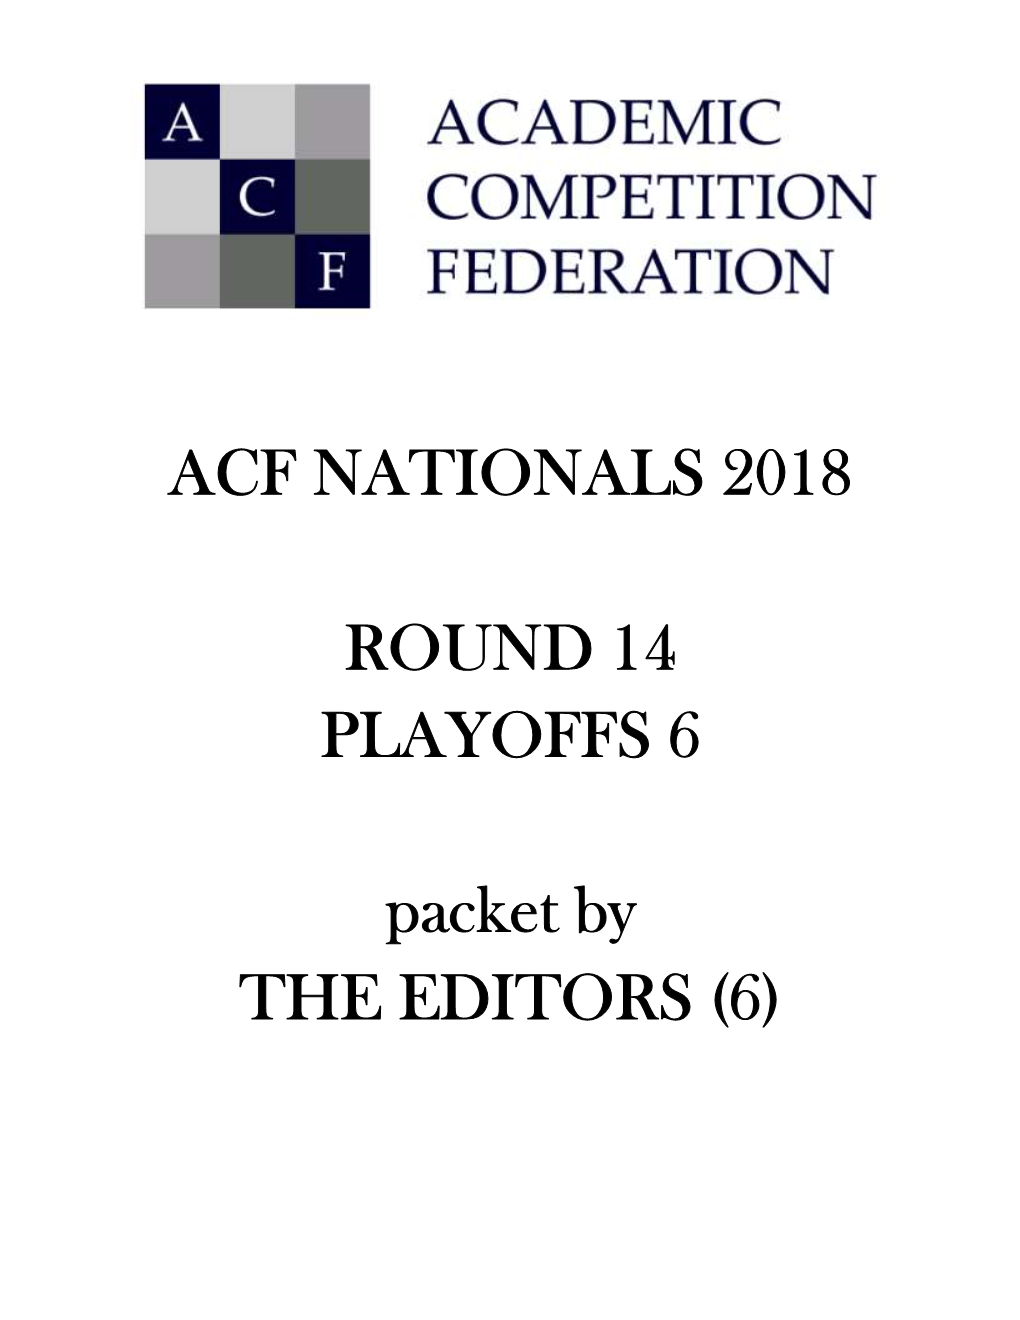 ACF NATIONALS 2018 ROUND 14 PLAYOFFS 6 Packet by THE